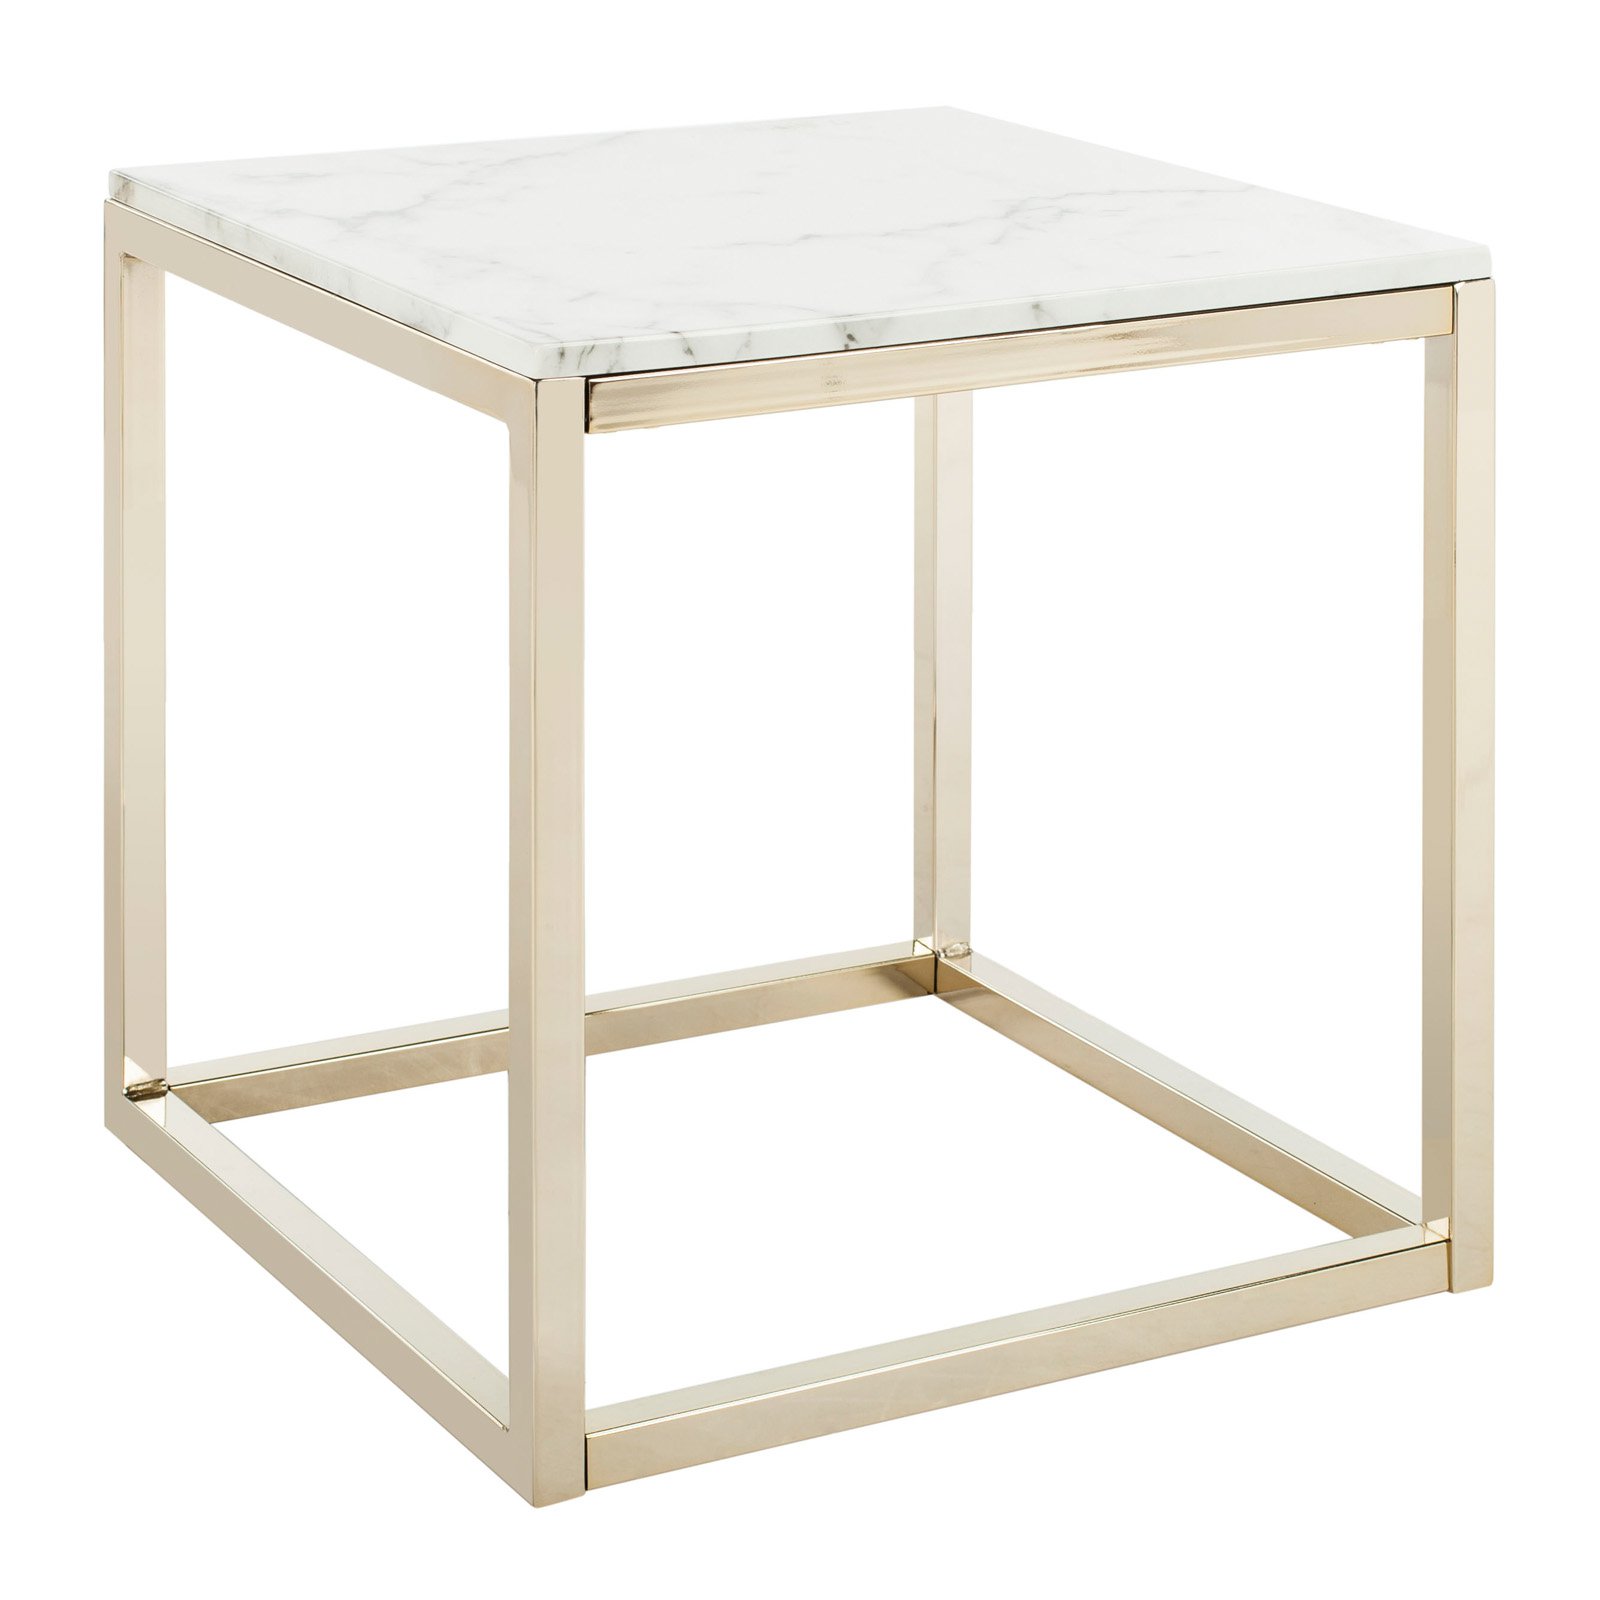 SAFAVIEH Bethany Square Modern Glam End Table, White Marble/Brass - image 1 of 11